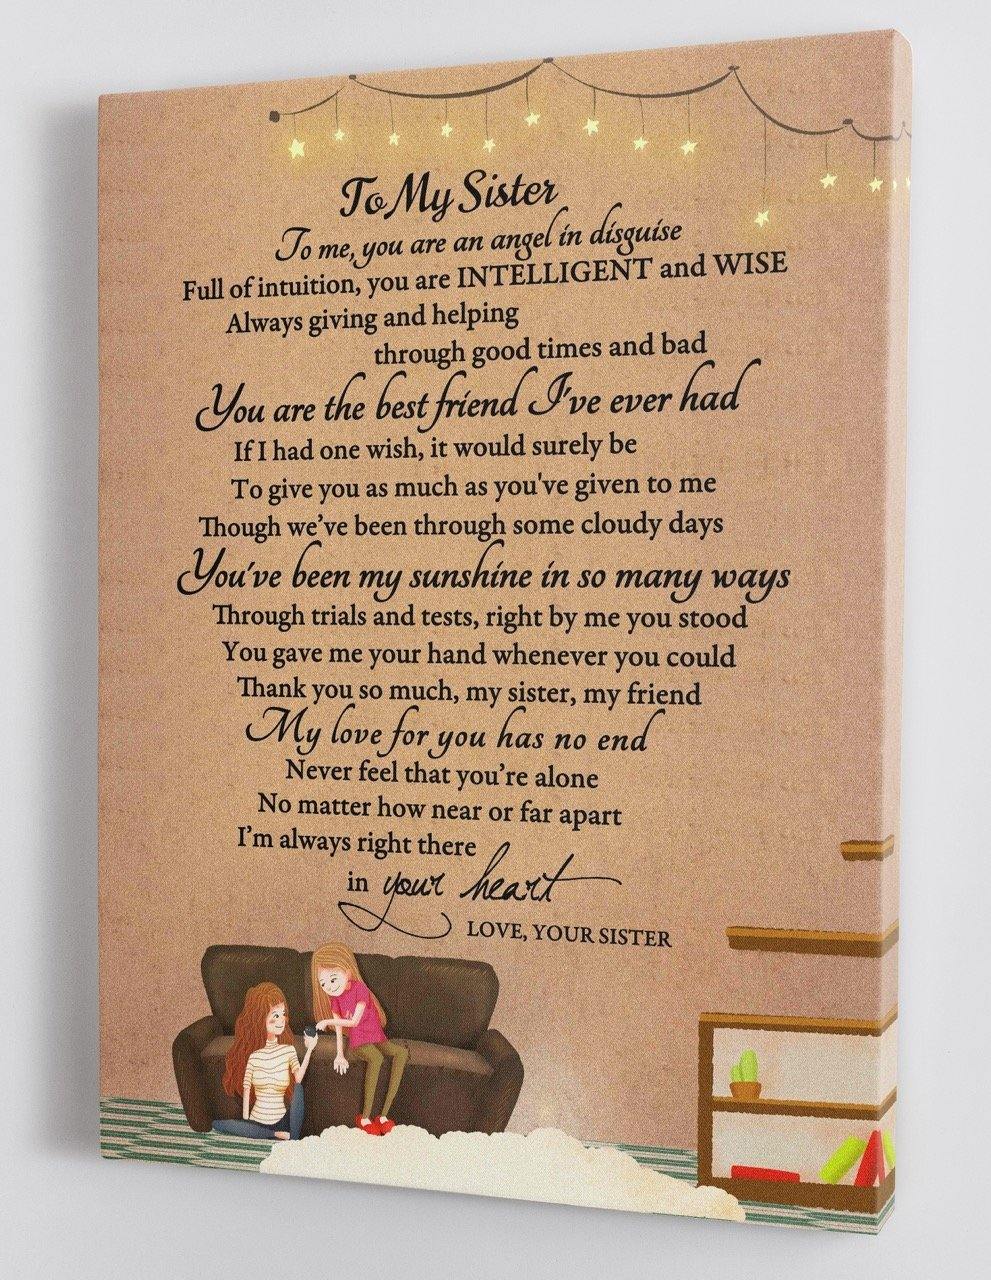 To My Sister - Love From Your Sister - Framed Canvas Gift SS001 - DivesArt LLC